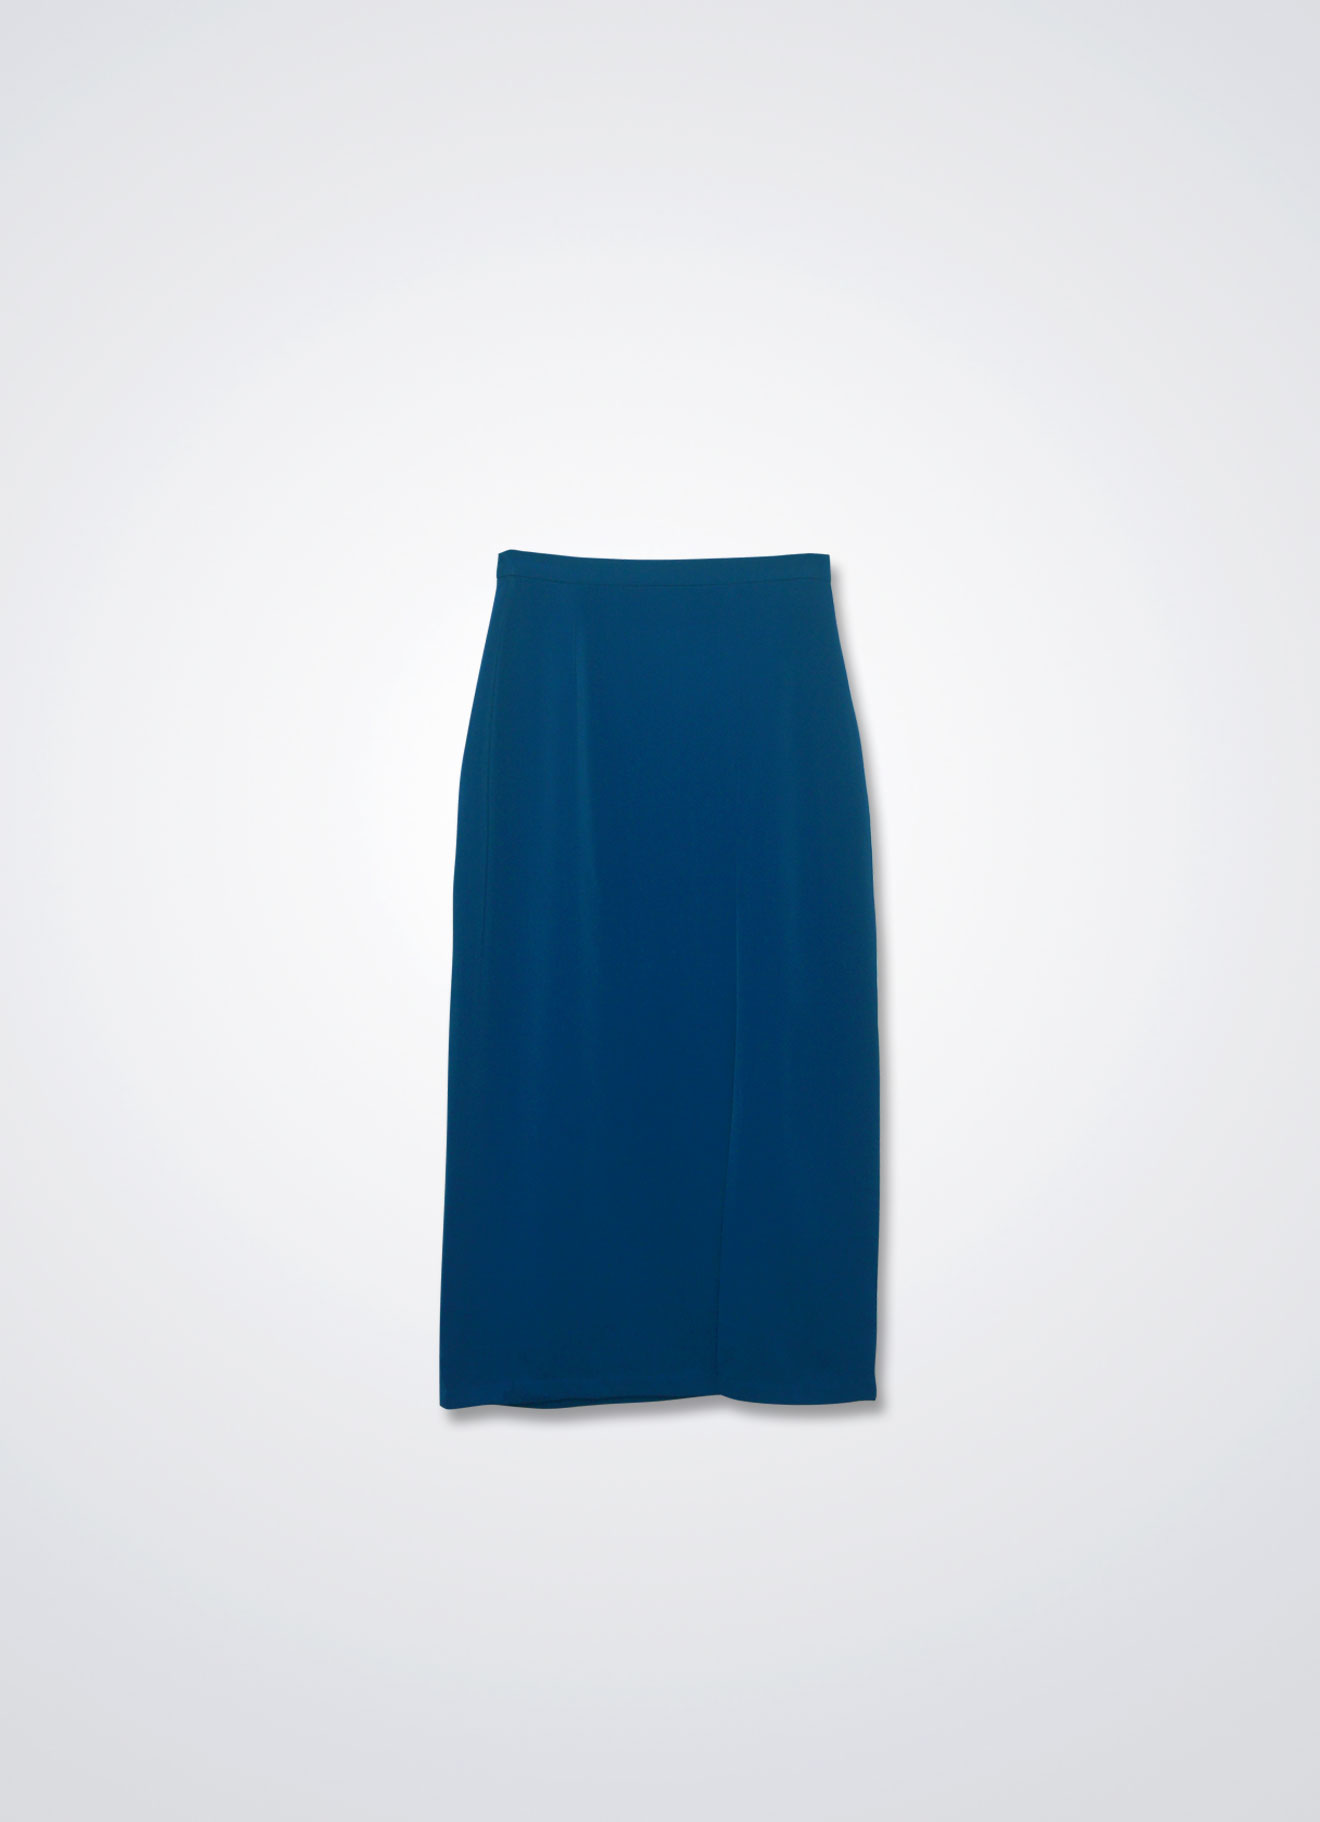 Moroccan-Blue by Skirt